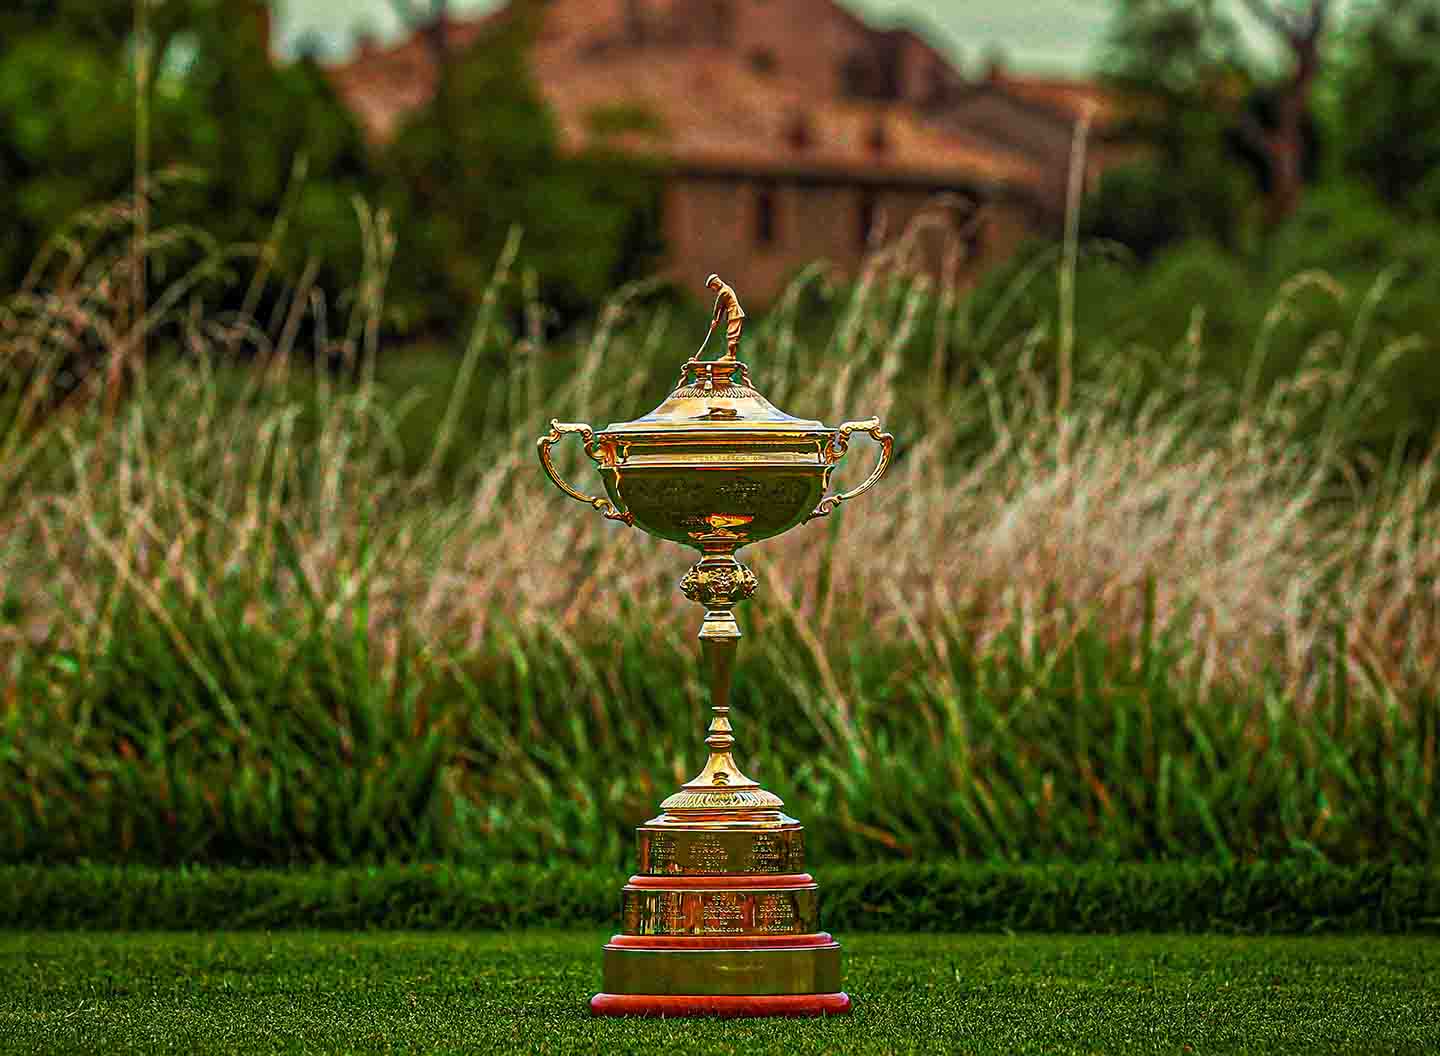 British Masters on TV 2023, Schedule, how to watch, TV channel